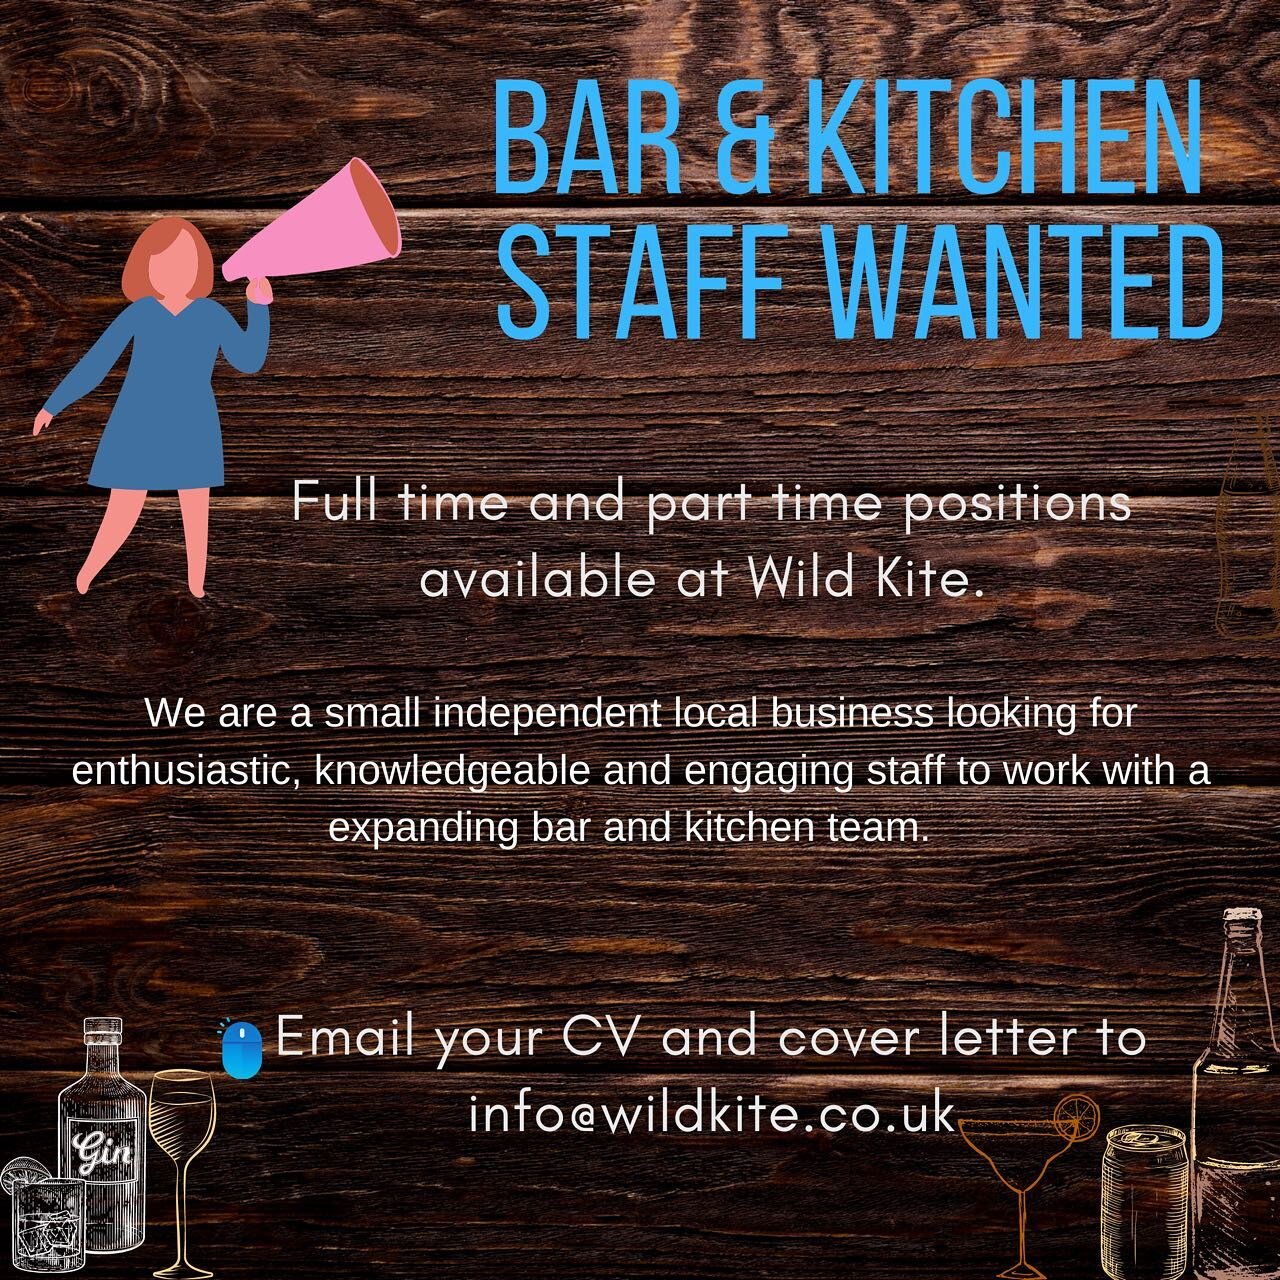 We are looking to expand our team here at Wild Kite in Great Missenden. If you are interested in working with a great, fun team in the craft beer, wine or gin industry, send us your CV to info@wildkite.co.uk or pop in.

We look forward to hearing fro